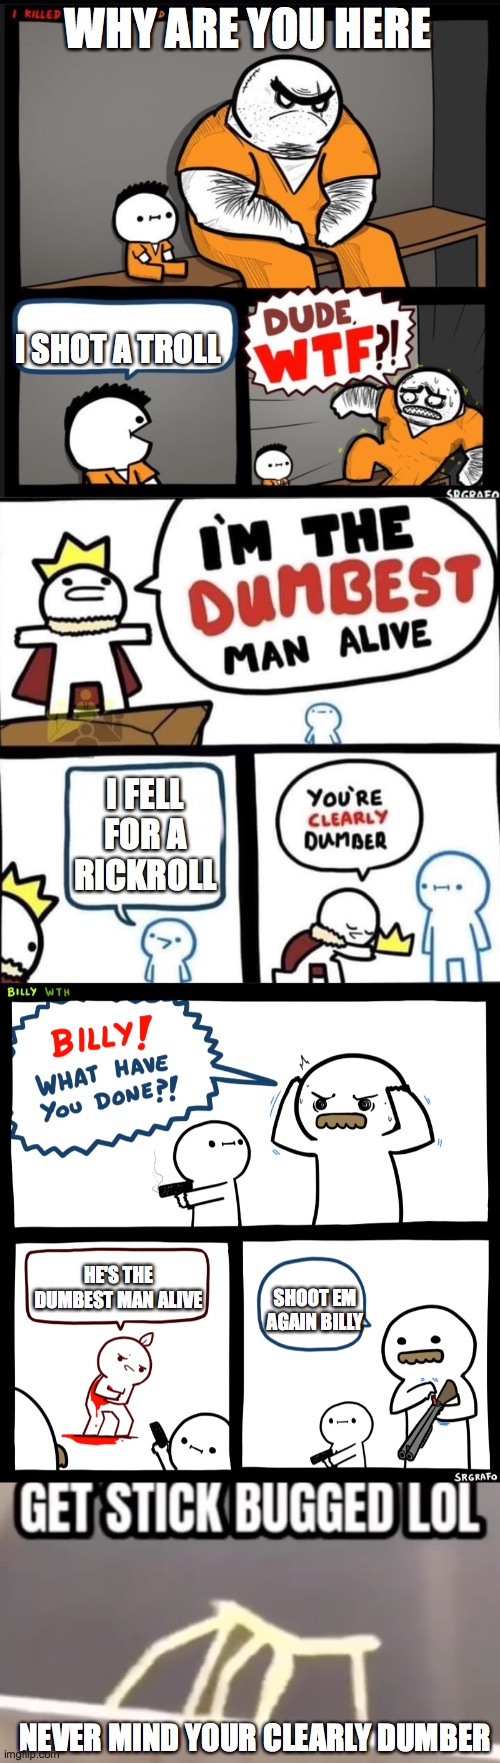 ill tell ya the whole story | WHY ARE YOU HERE; I SHOT A TROLL; I FELL FOR A RICKROLL; HE'S THE DUMBEST MAN ALIVE; SHOOT EM AGAIN BILLY; NEVER MIND YOUR CLEARLY DUMBER | image tagged in srgrafo dude wtf,dumbest man alive blank,billy what have you done | made w/ Imgflip meme maker